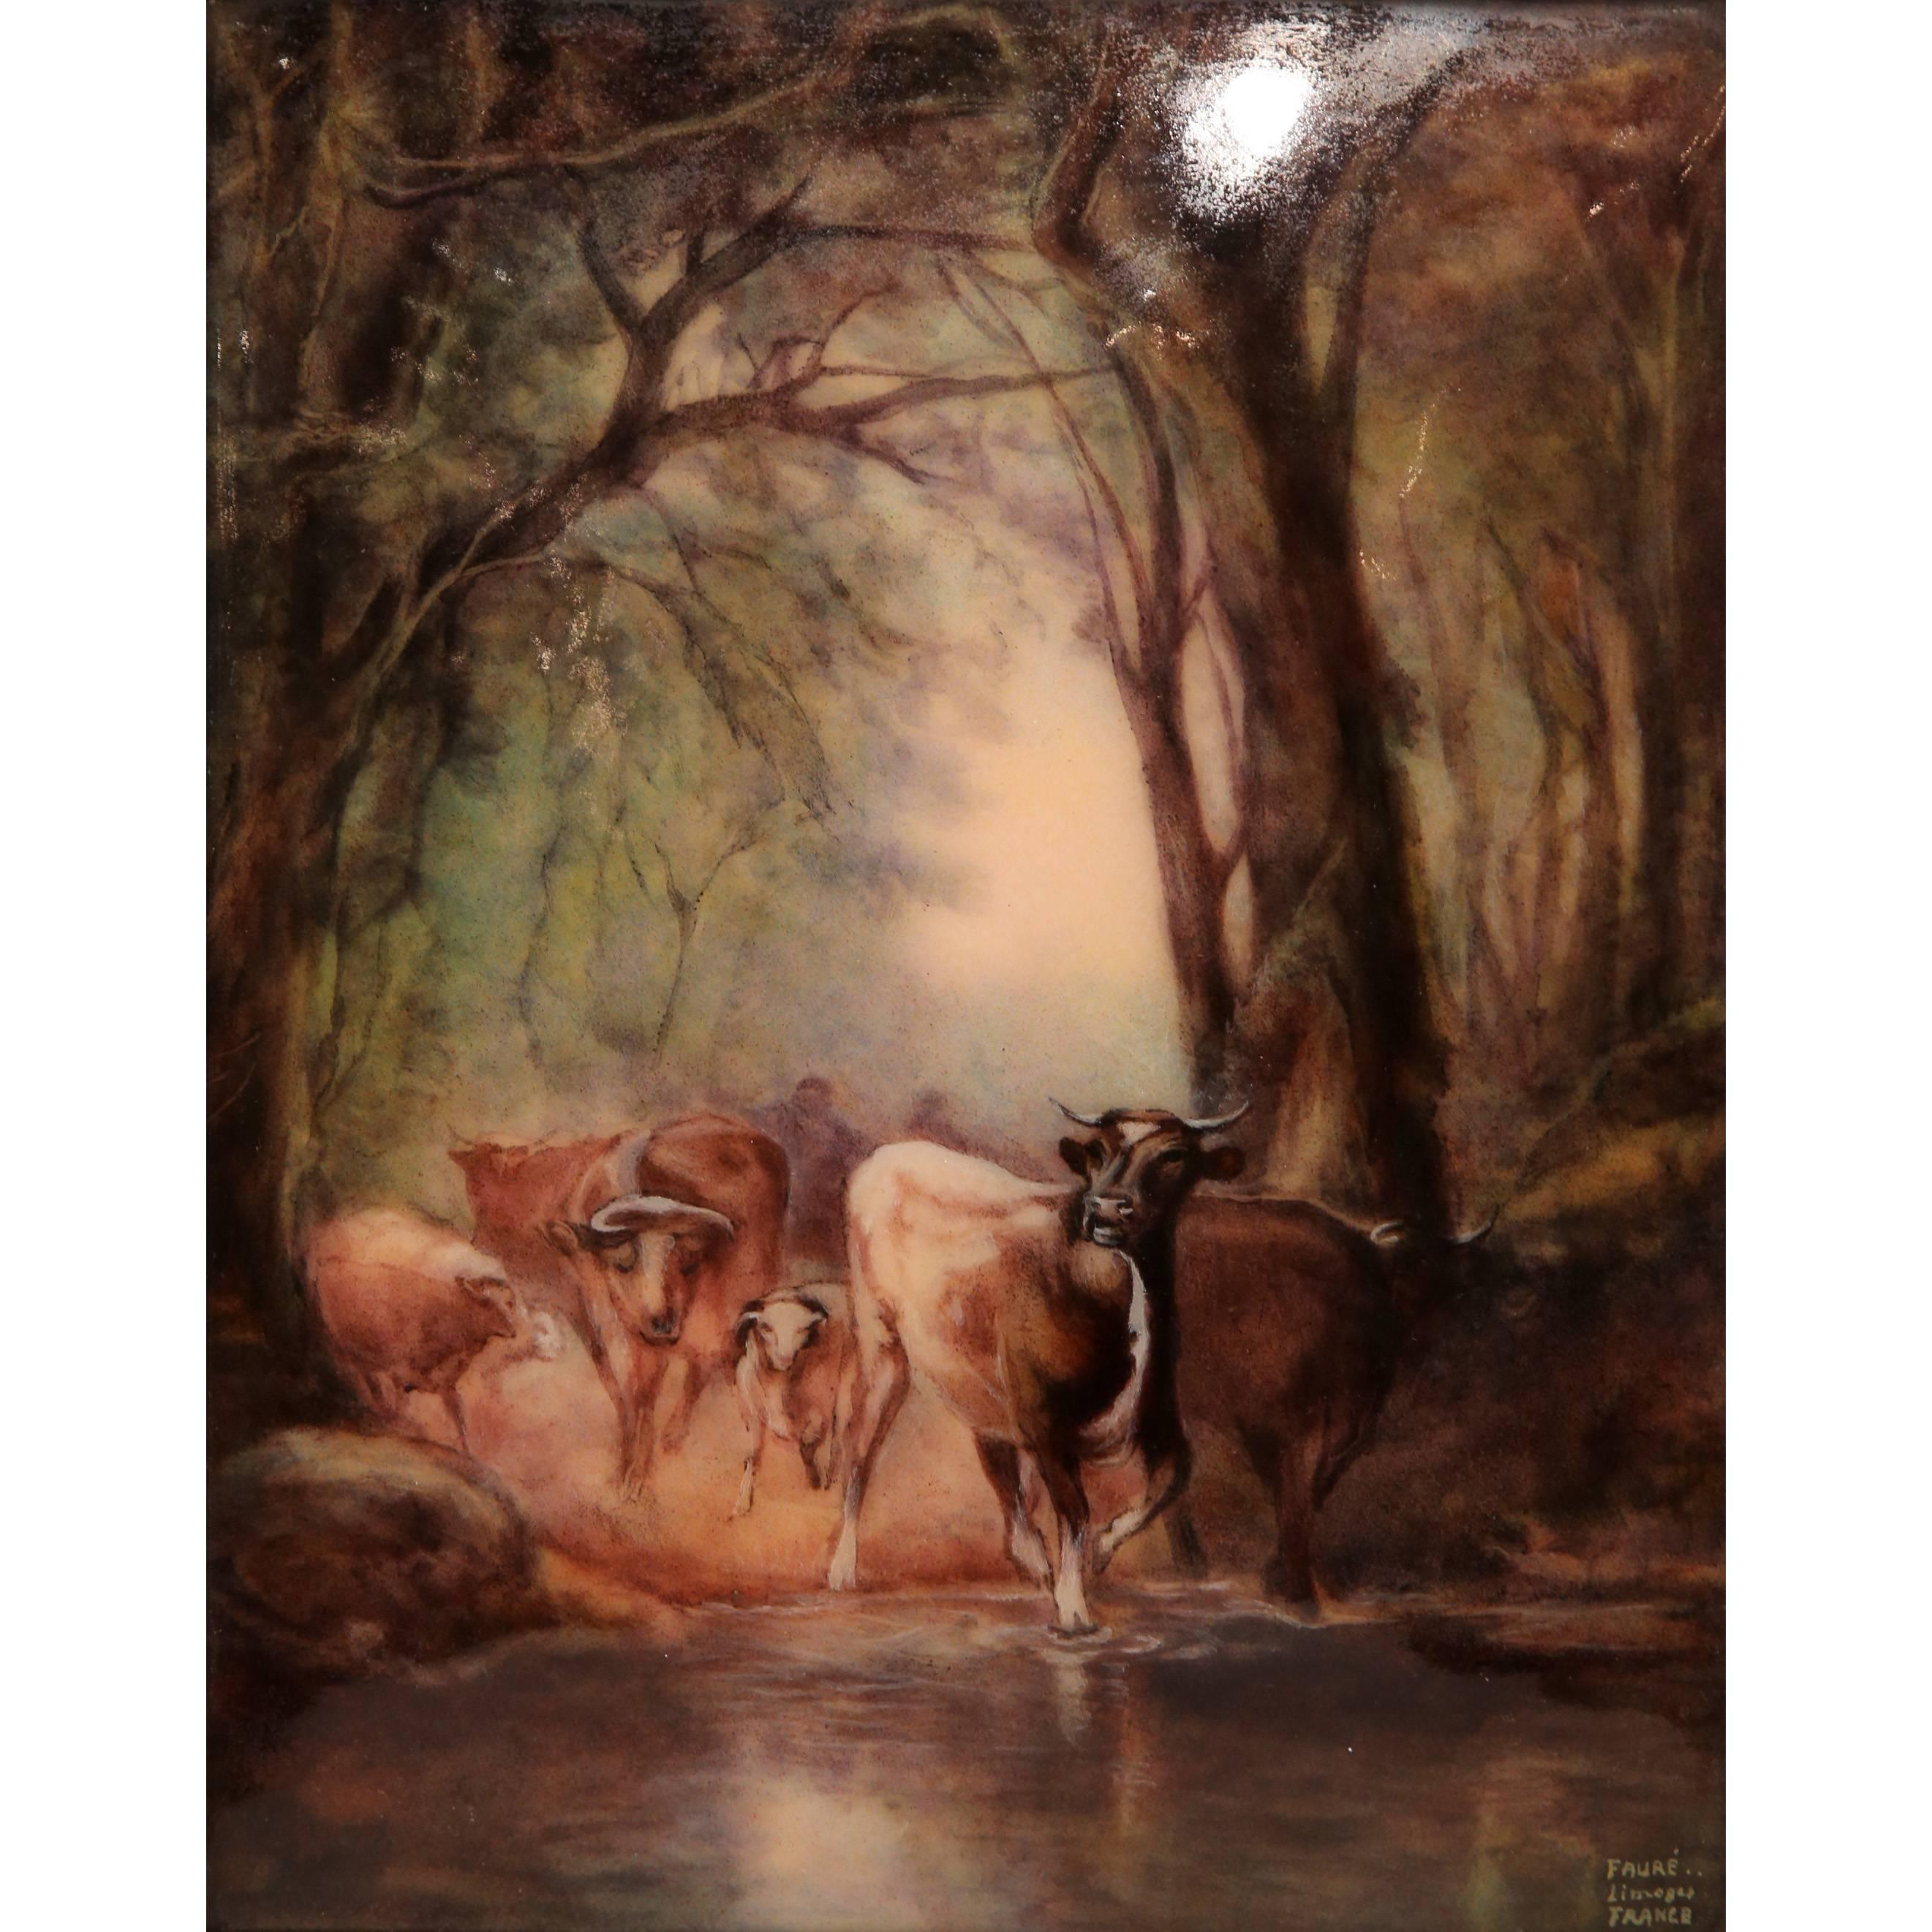 Early 20th Century, French Framed Enamel Cow Painting Signed Faure Limoges - Brown Animal Painting by Camille Fauré